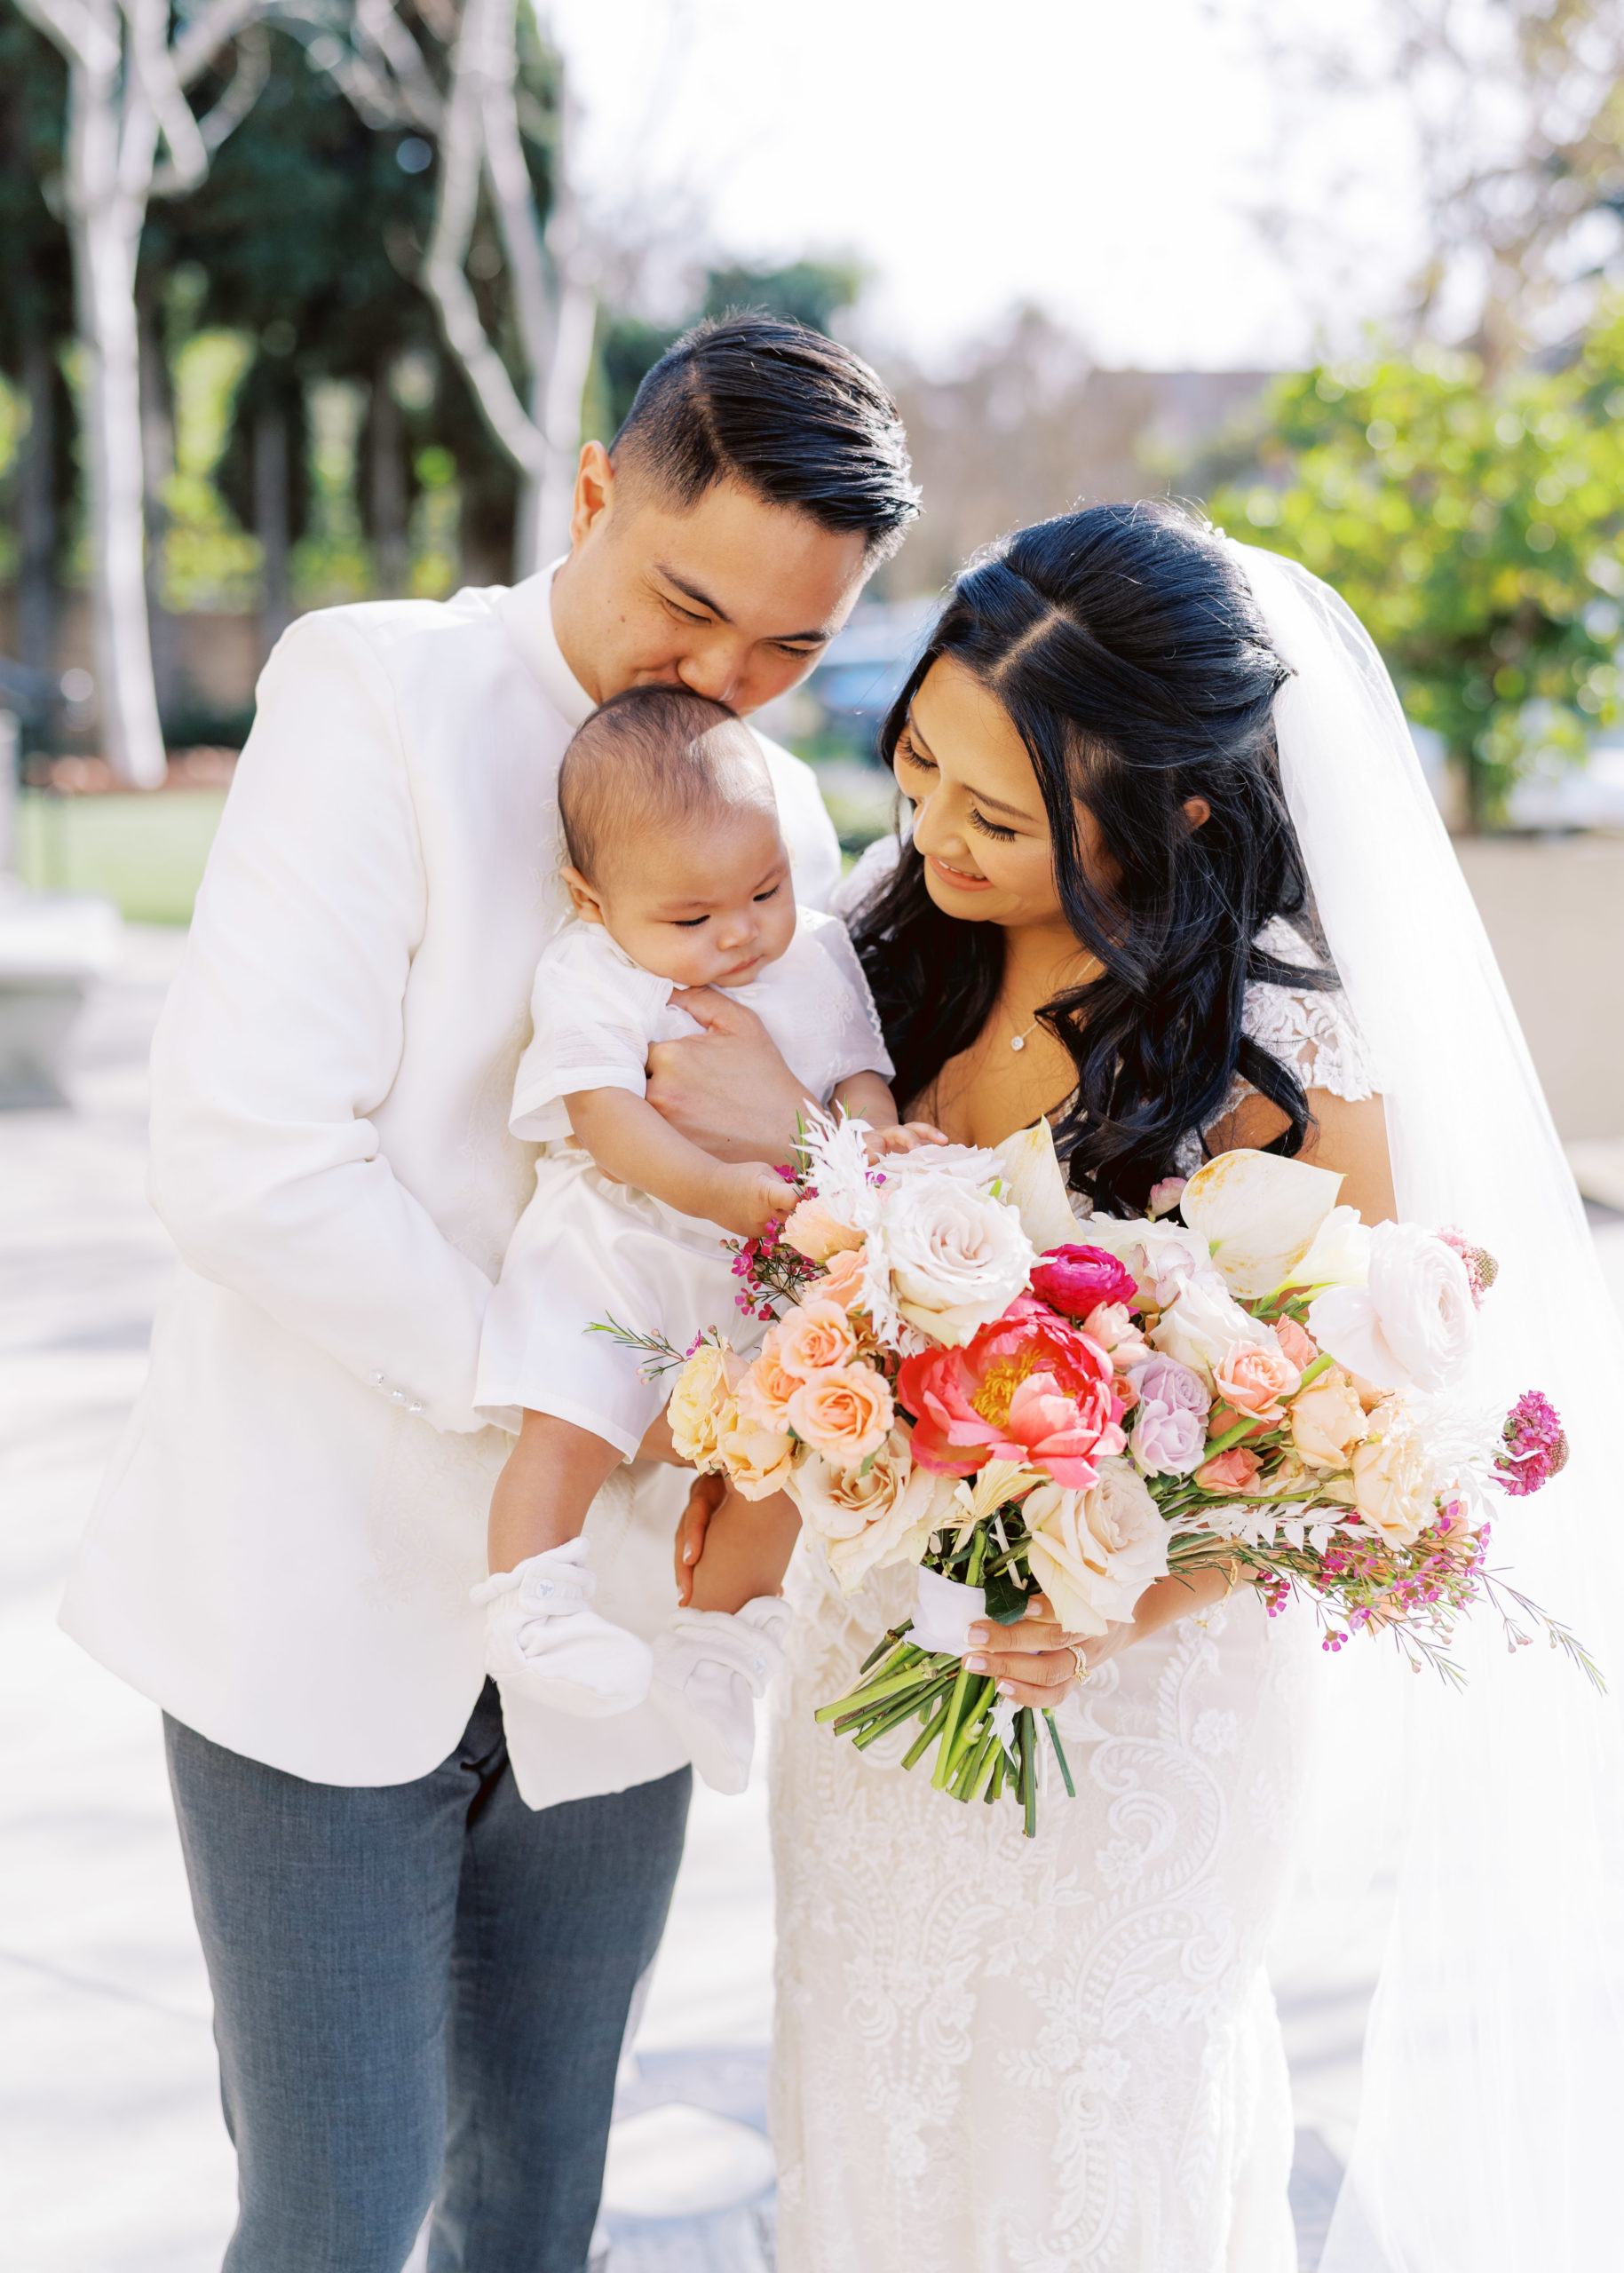 bride in lace wedding dress and bright bridal bouquet stands with groom in white wedding attire while holding baby during wedding portrait shots